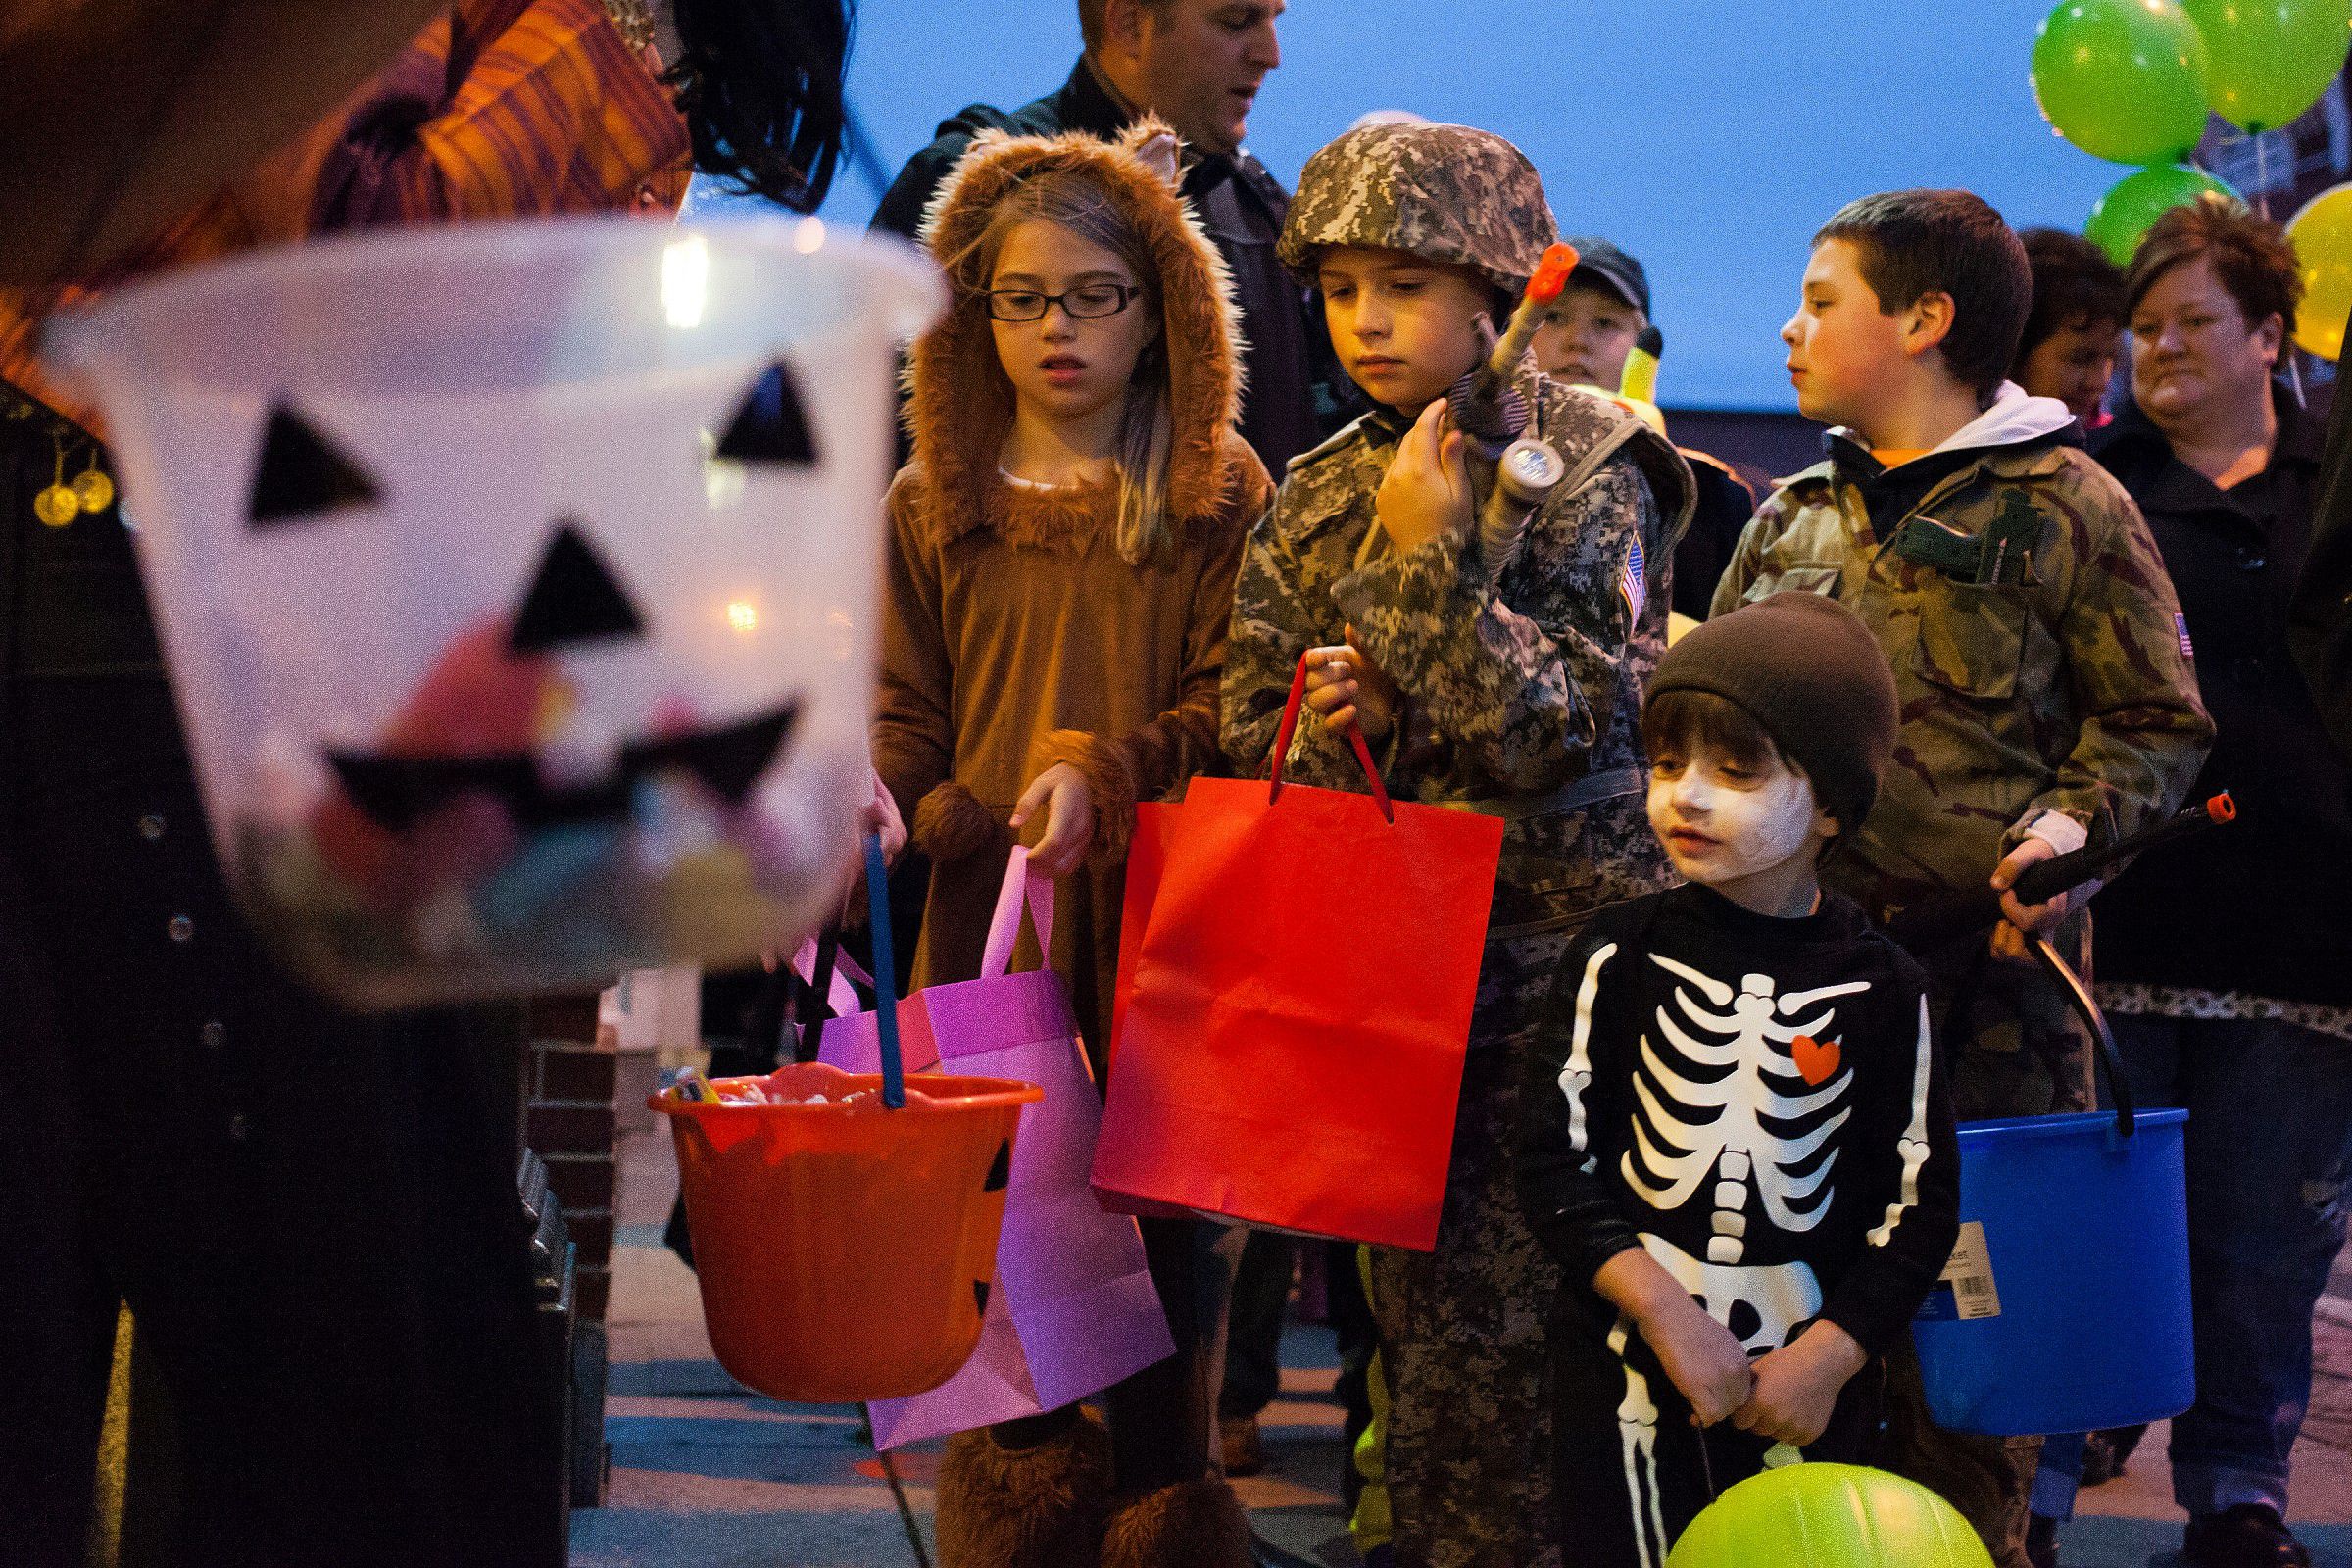 Have some free family fun at Intown Concord’s Halloween Howl The